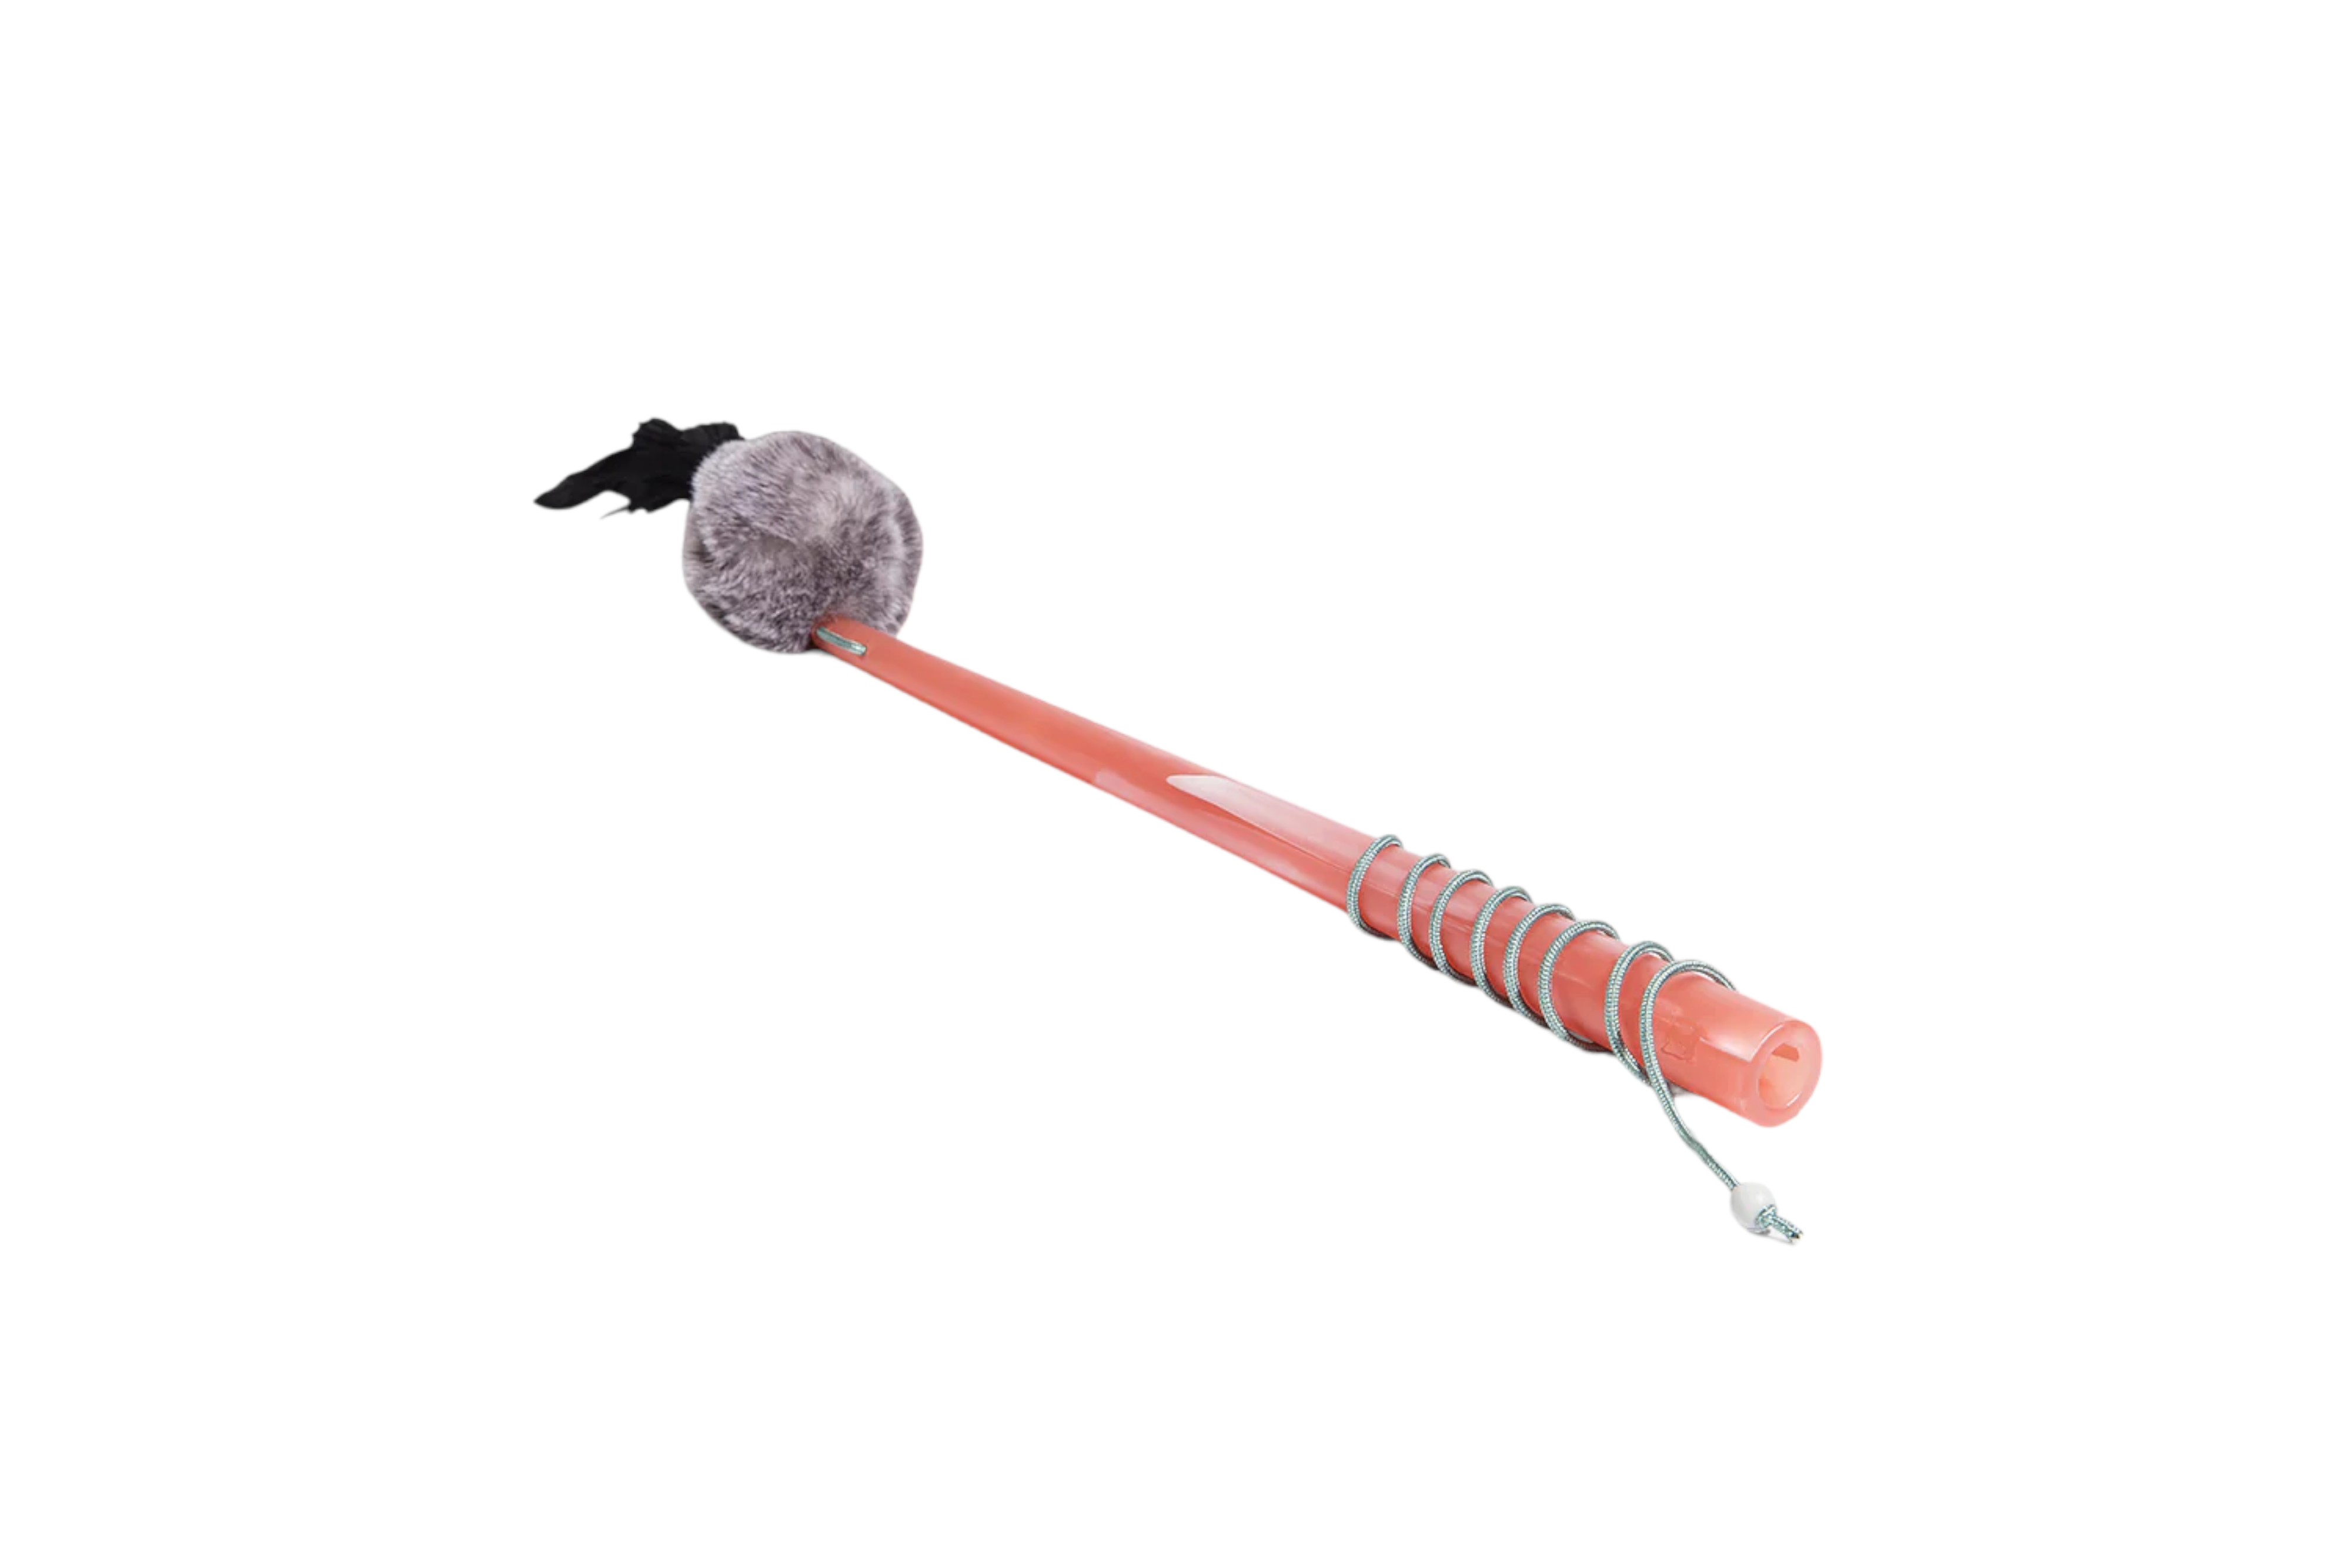 A Zee.Cat Wand Toy with a plush ball, feathers, and bells on a spring coil attached to a stick, designed to engage pets in playful activity, isolated on a white background.